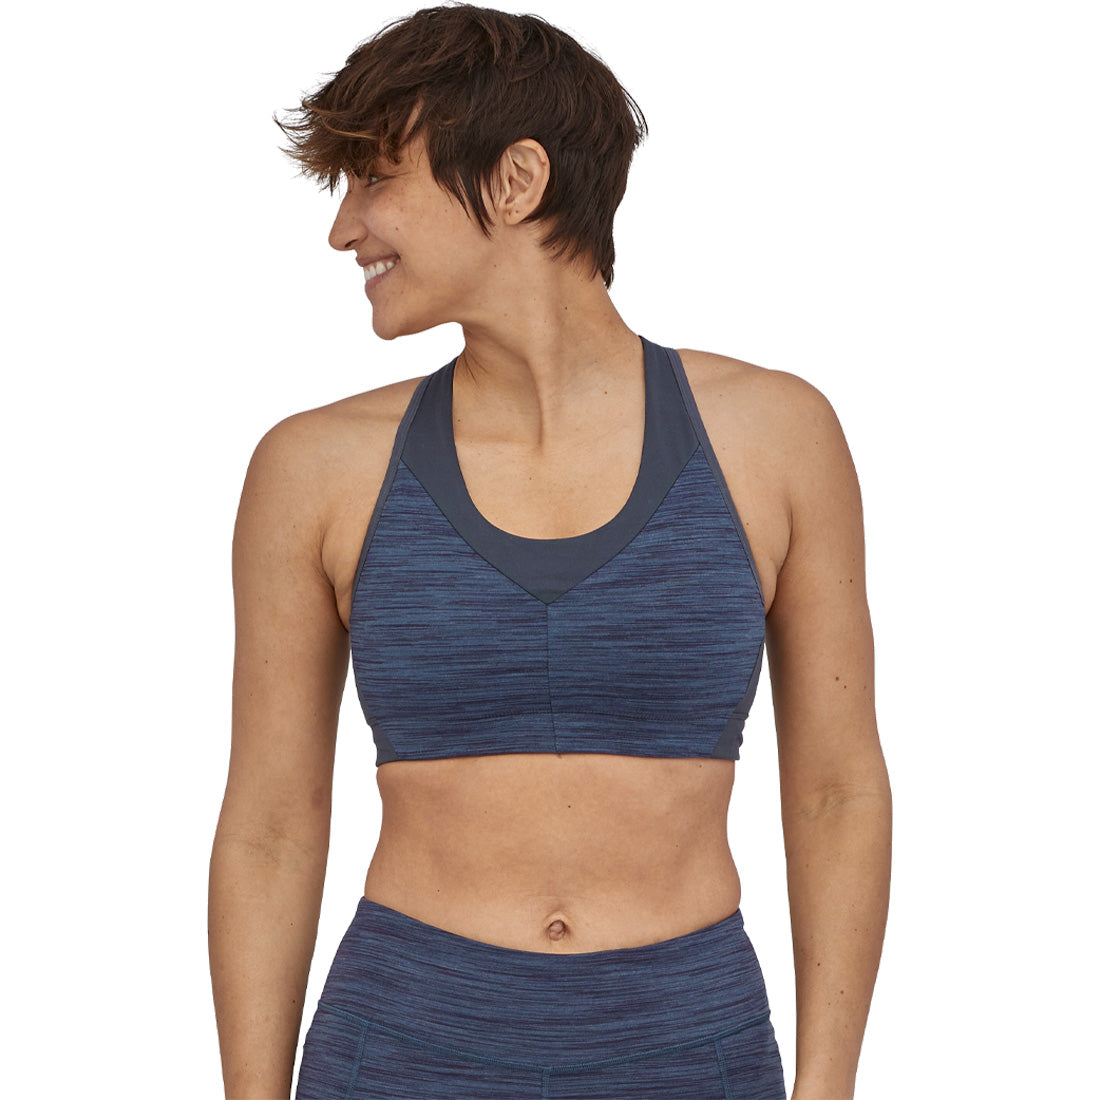 Nike Women's Indy Floral Light Support Sports Bra 